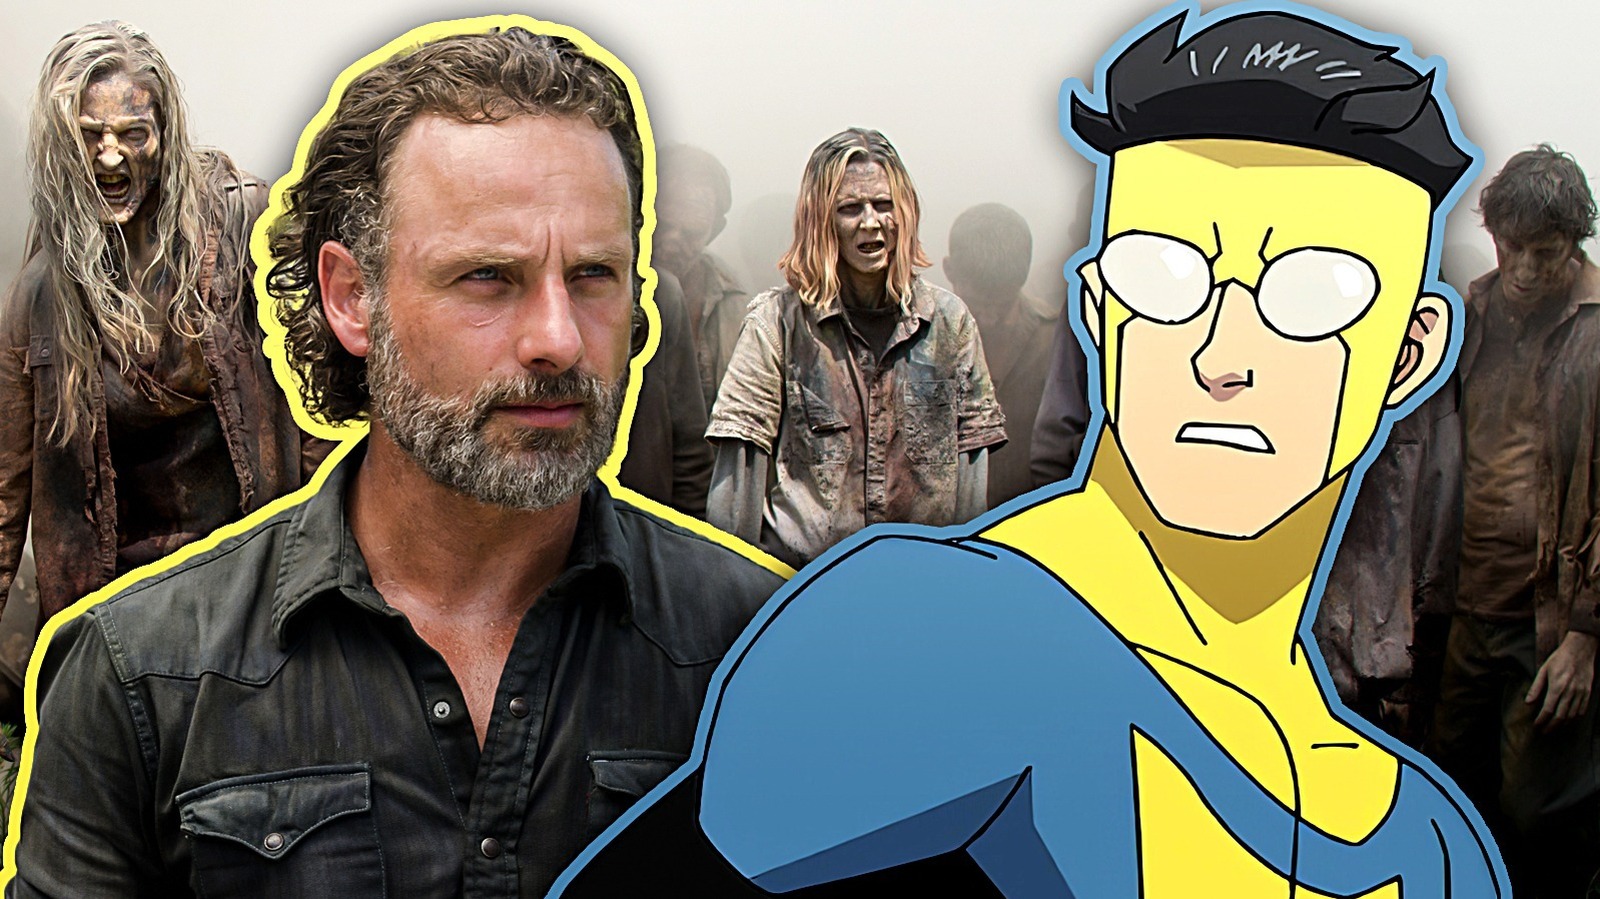 Uncover the Secret Walking Dead Easter Egg Hidden in Invincible Season 2 – Don’t Miss Out!